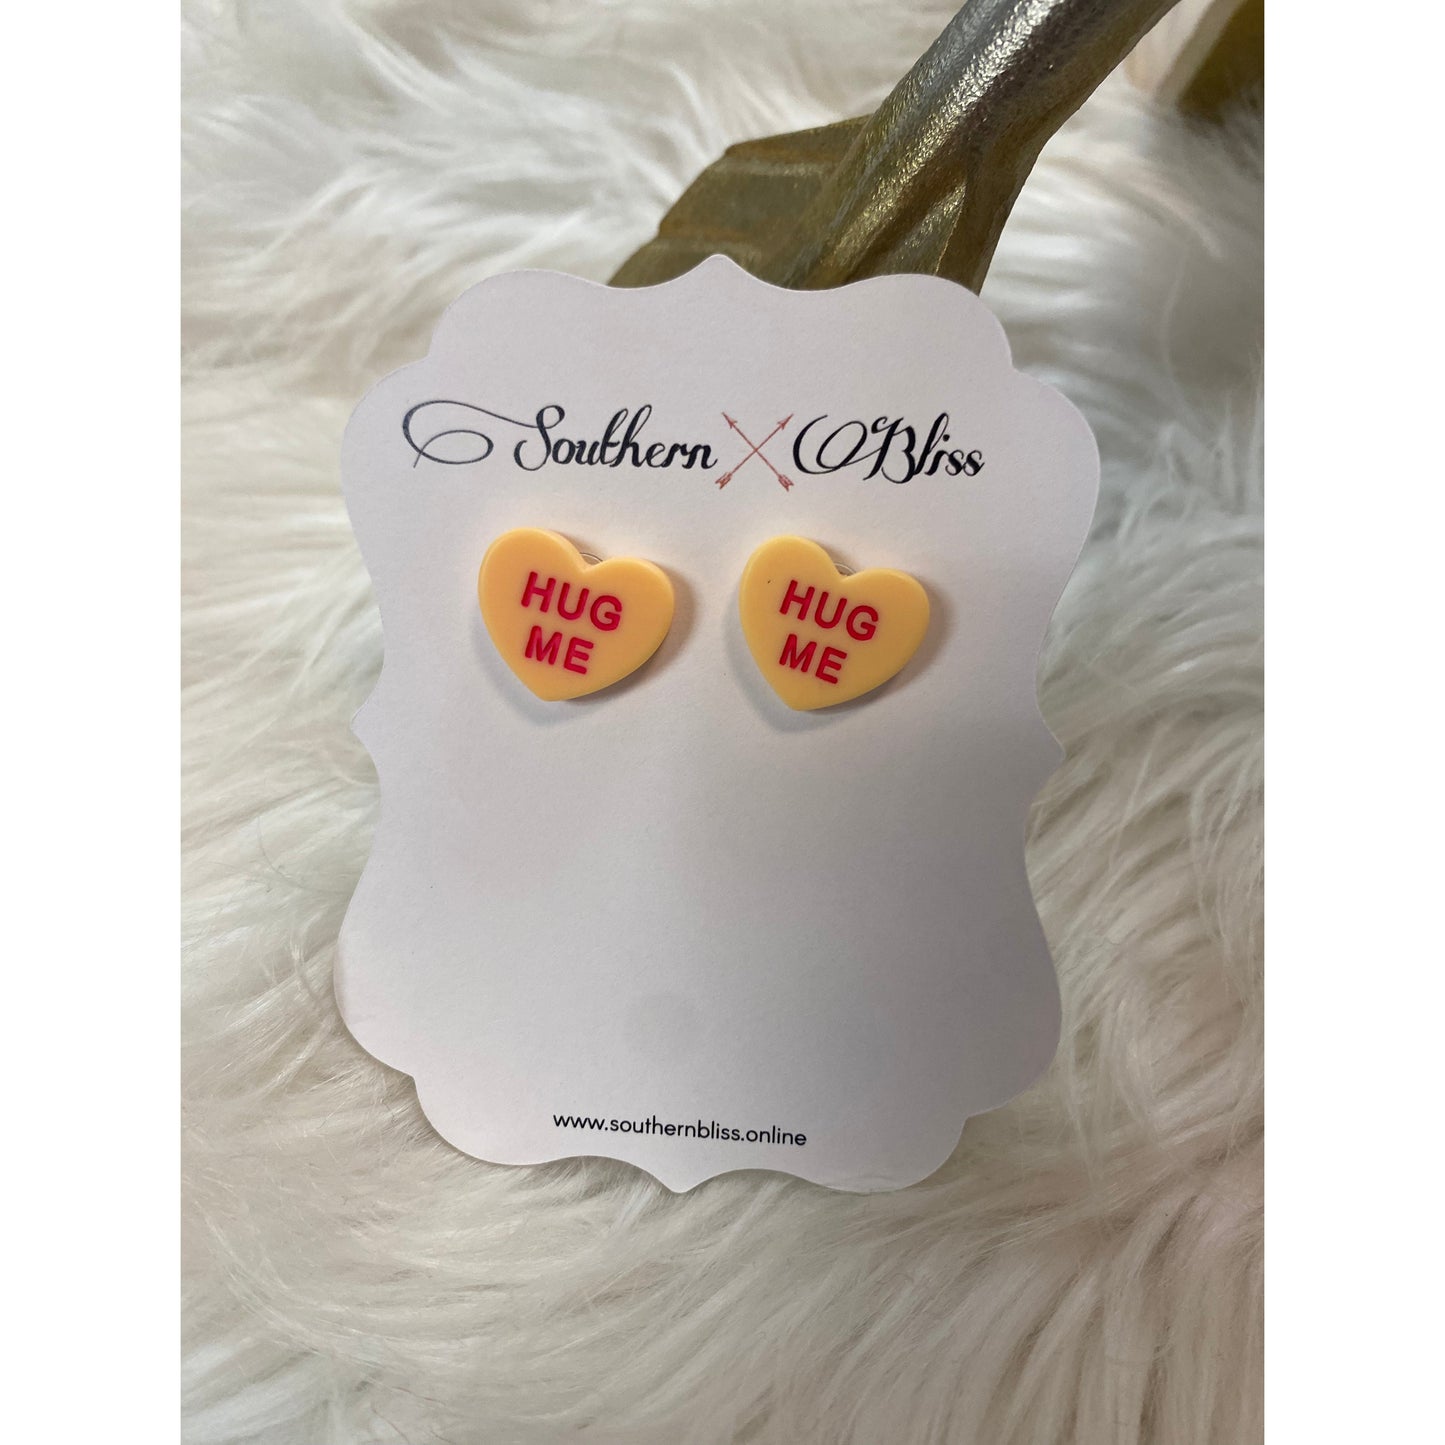 Conversation Candy Earrings